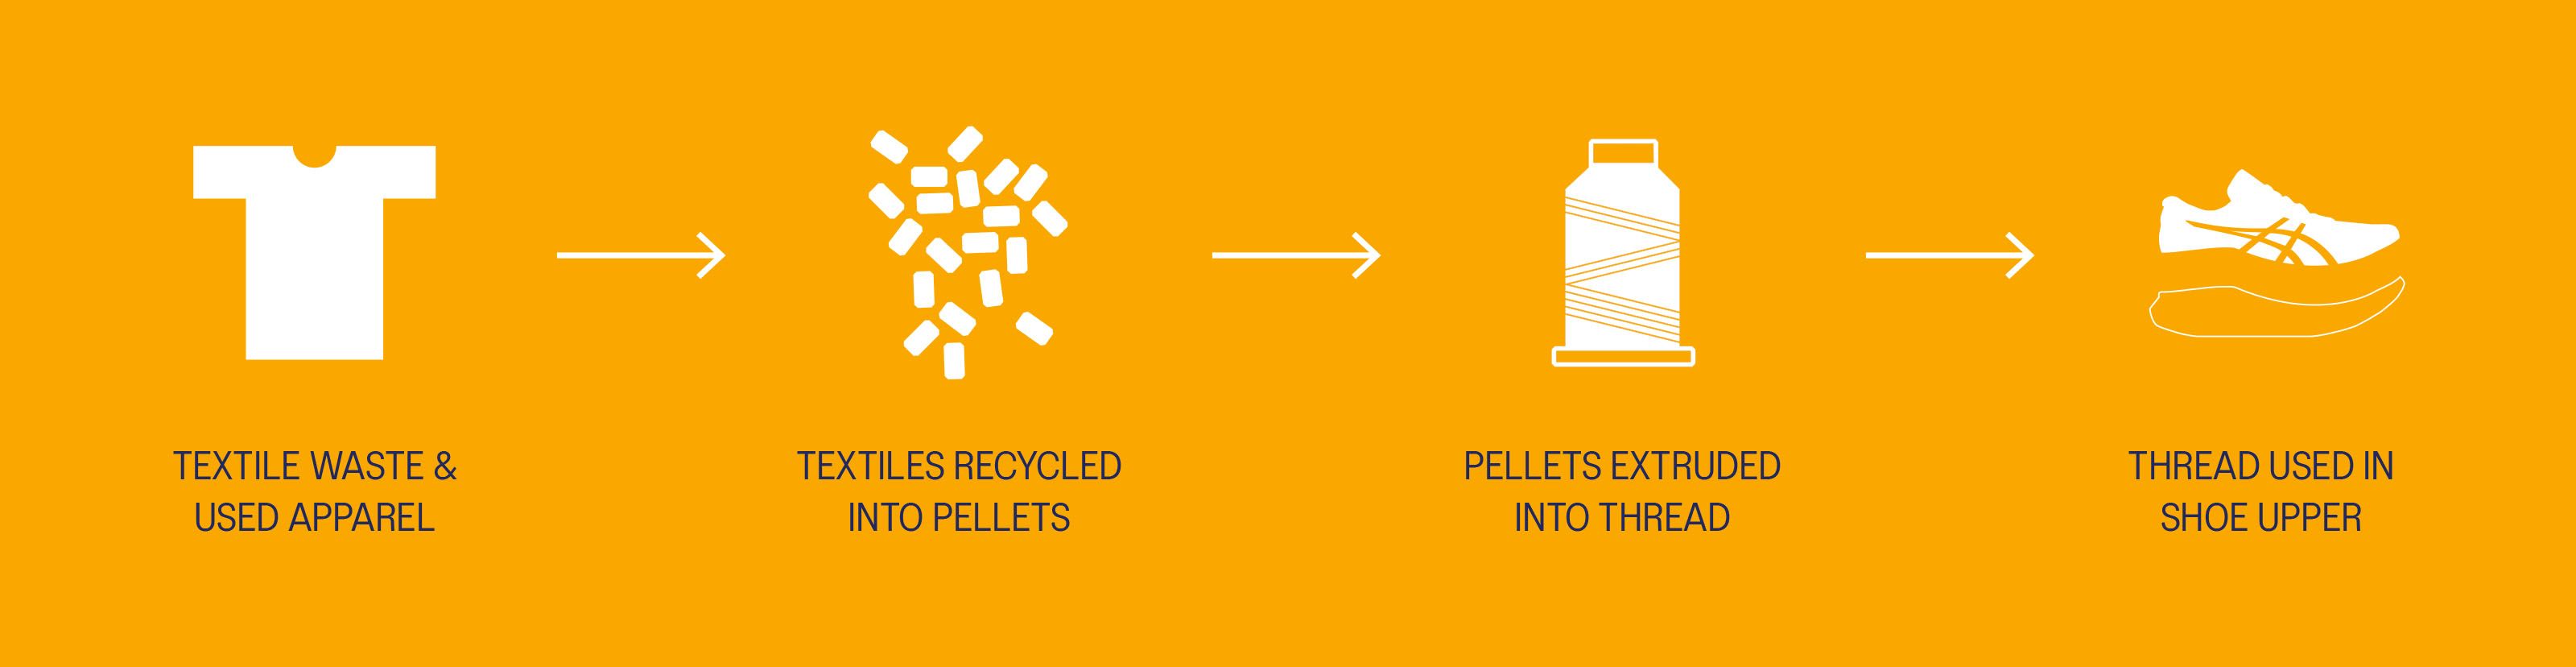 Textile recycling infographic